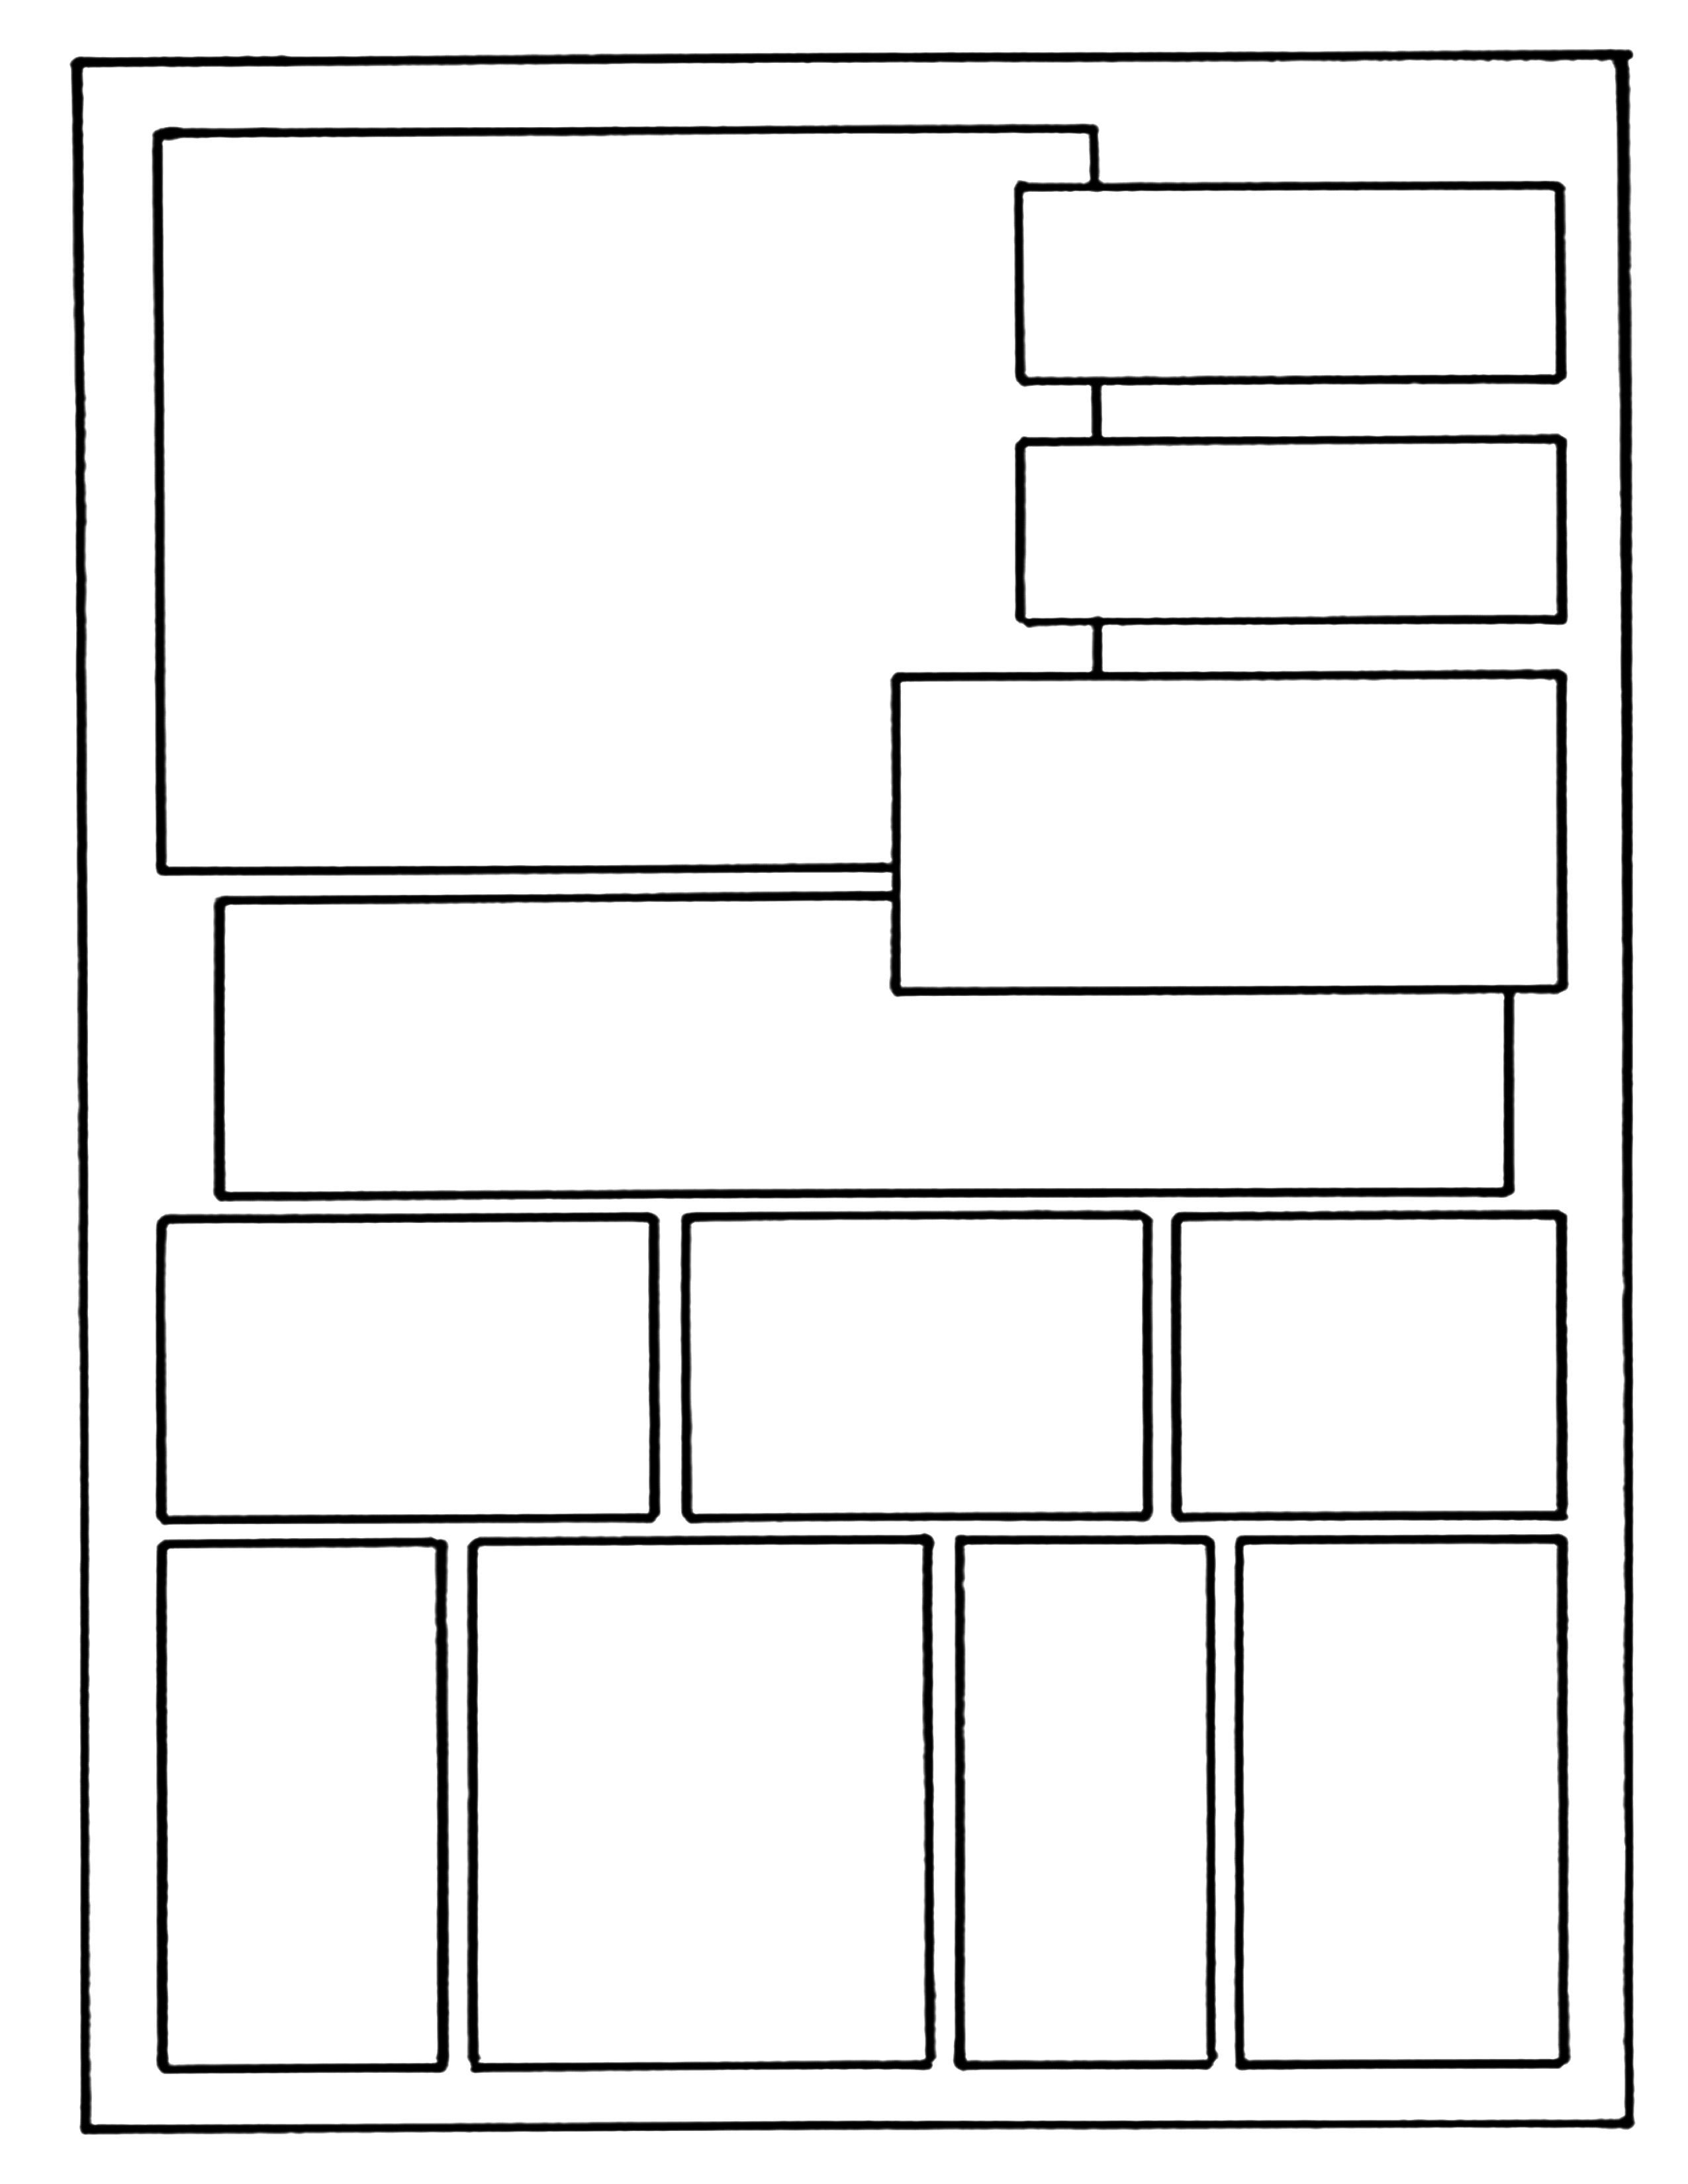 layout on 8 1 x 11 example ic book layout